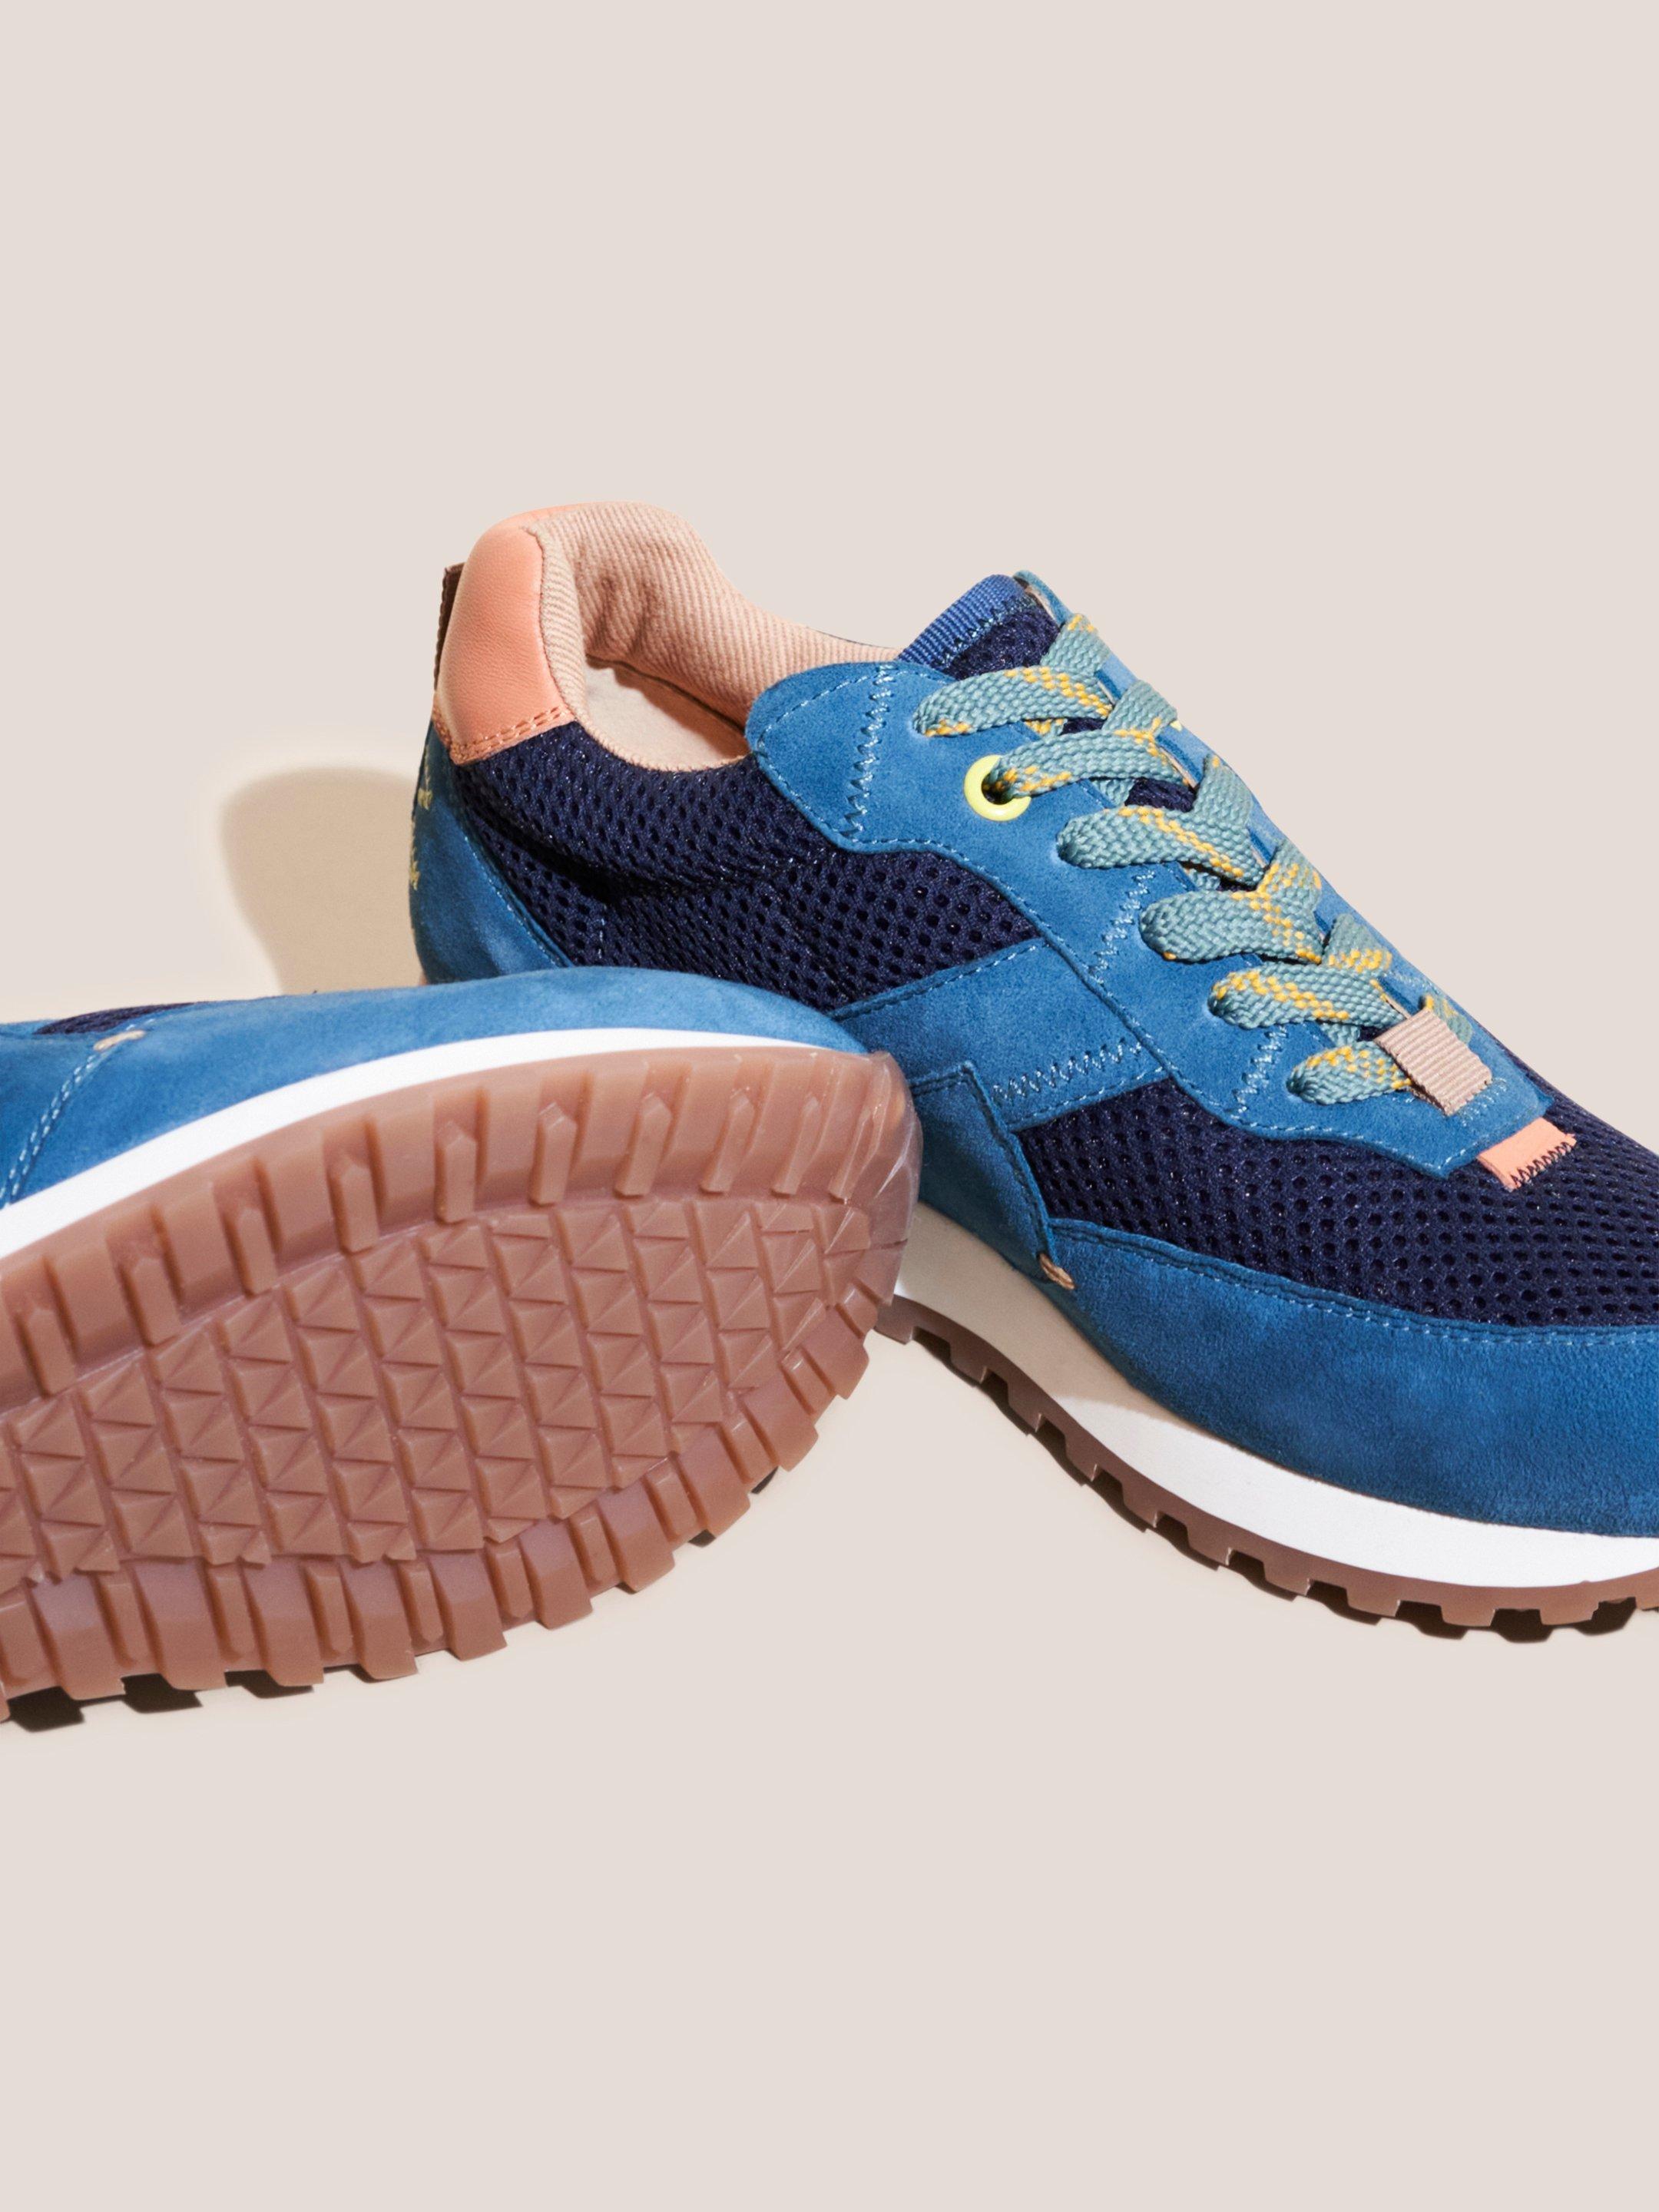 Retro Sports Trainers in BLUE MLT - FLAT DETAIL